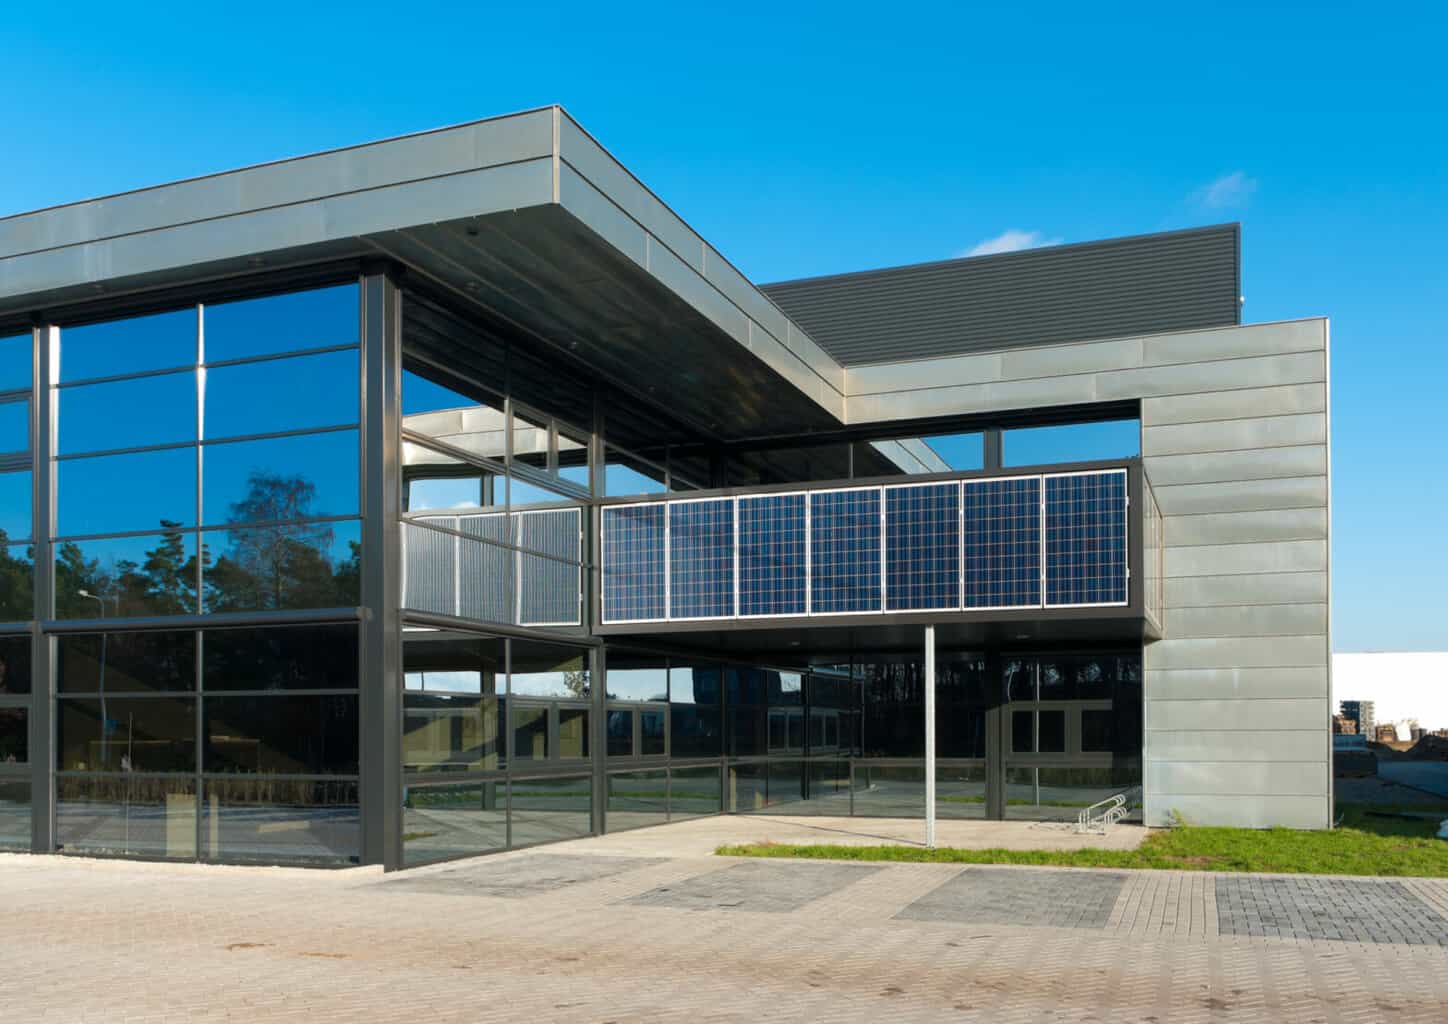 Sustainable Building with Solar Panels